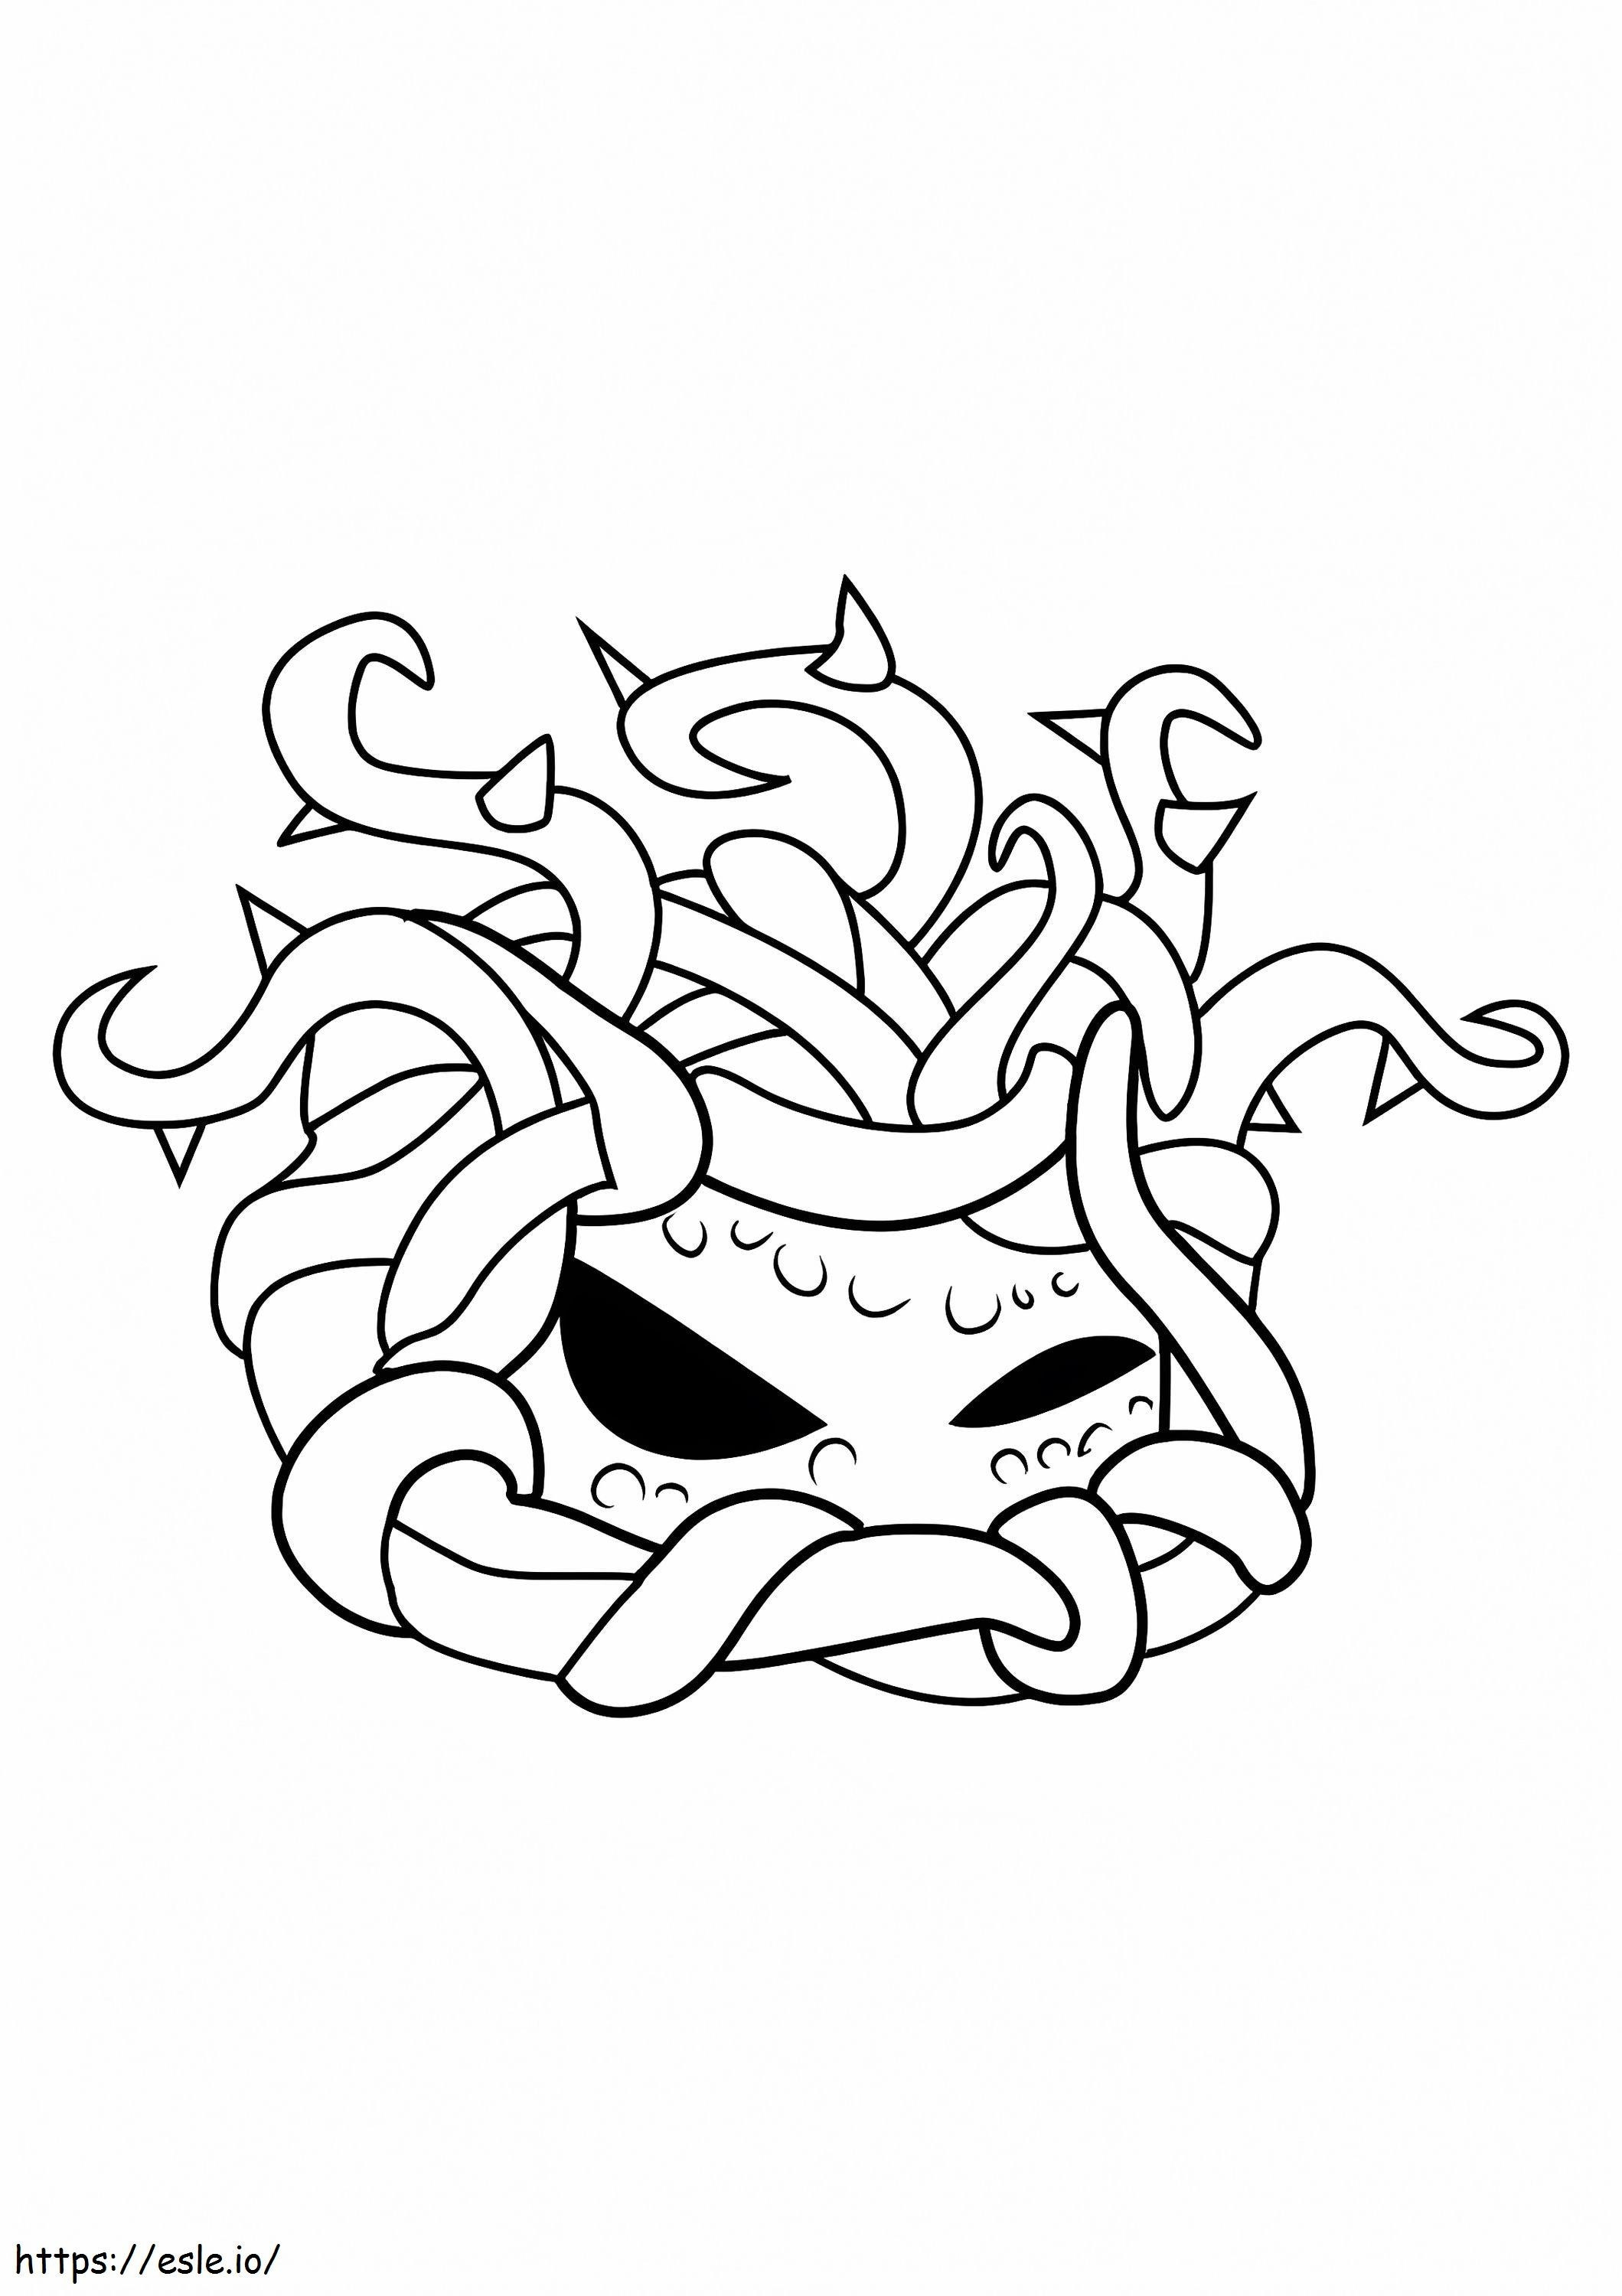 Kelp tangle in plants vs zombies coloring page